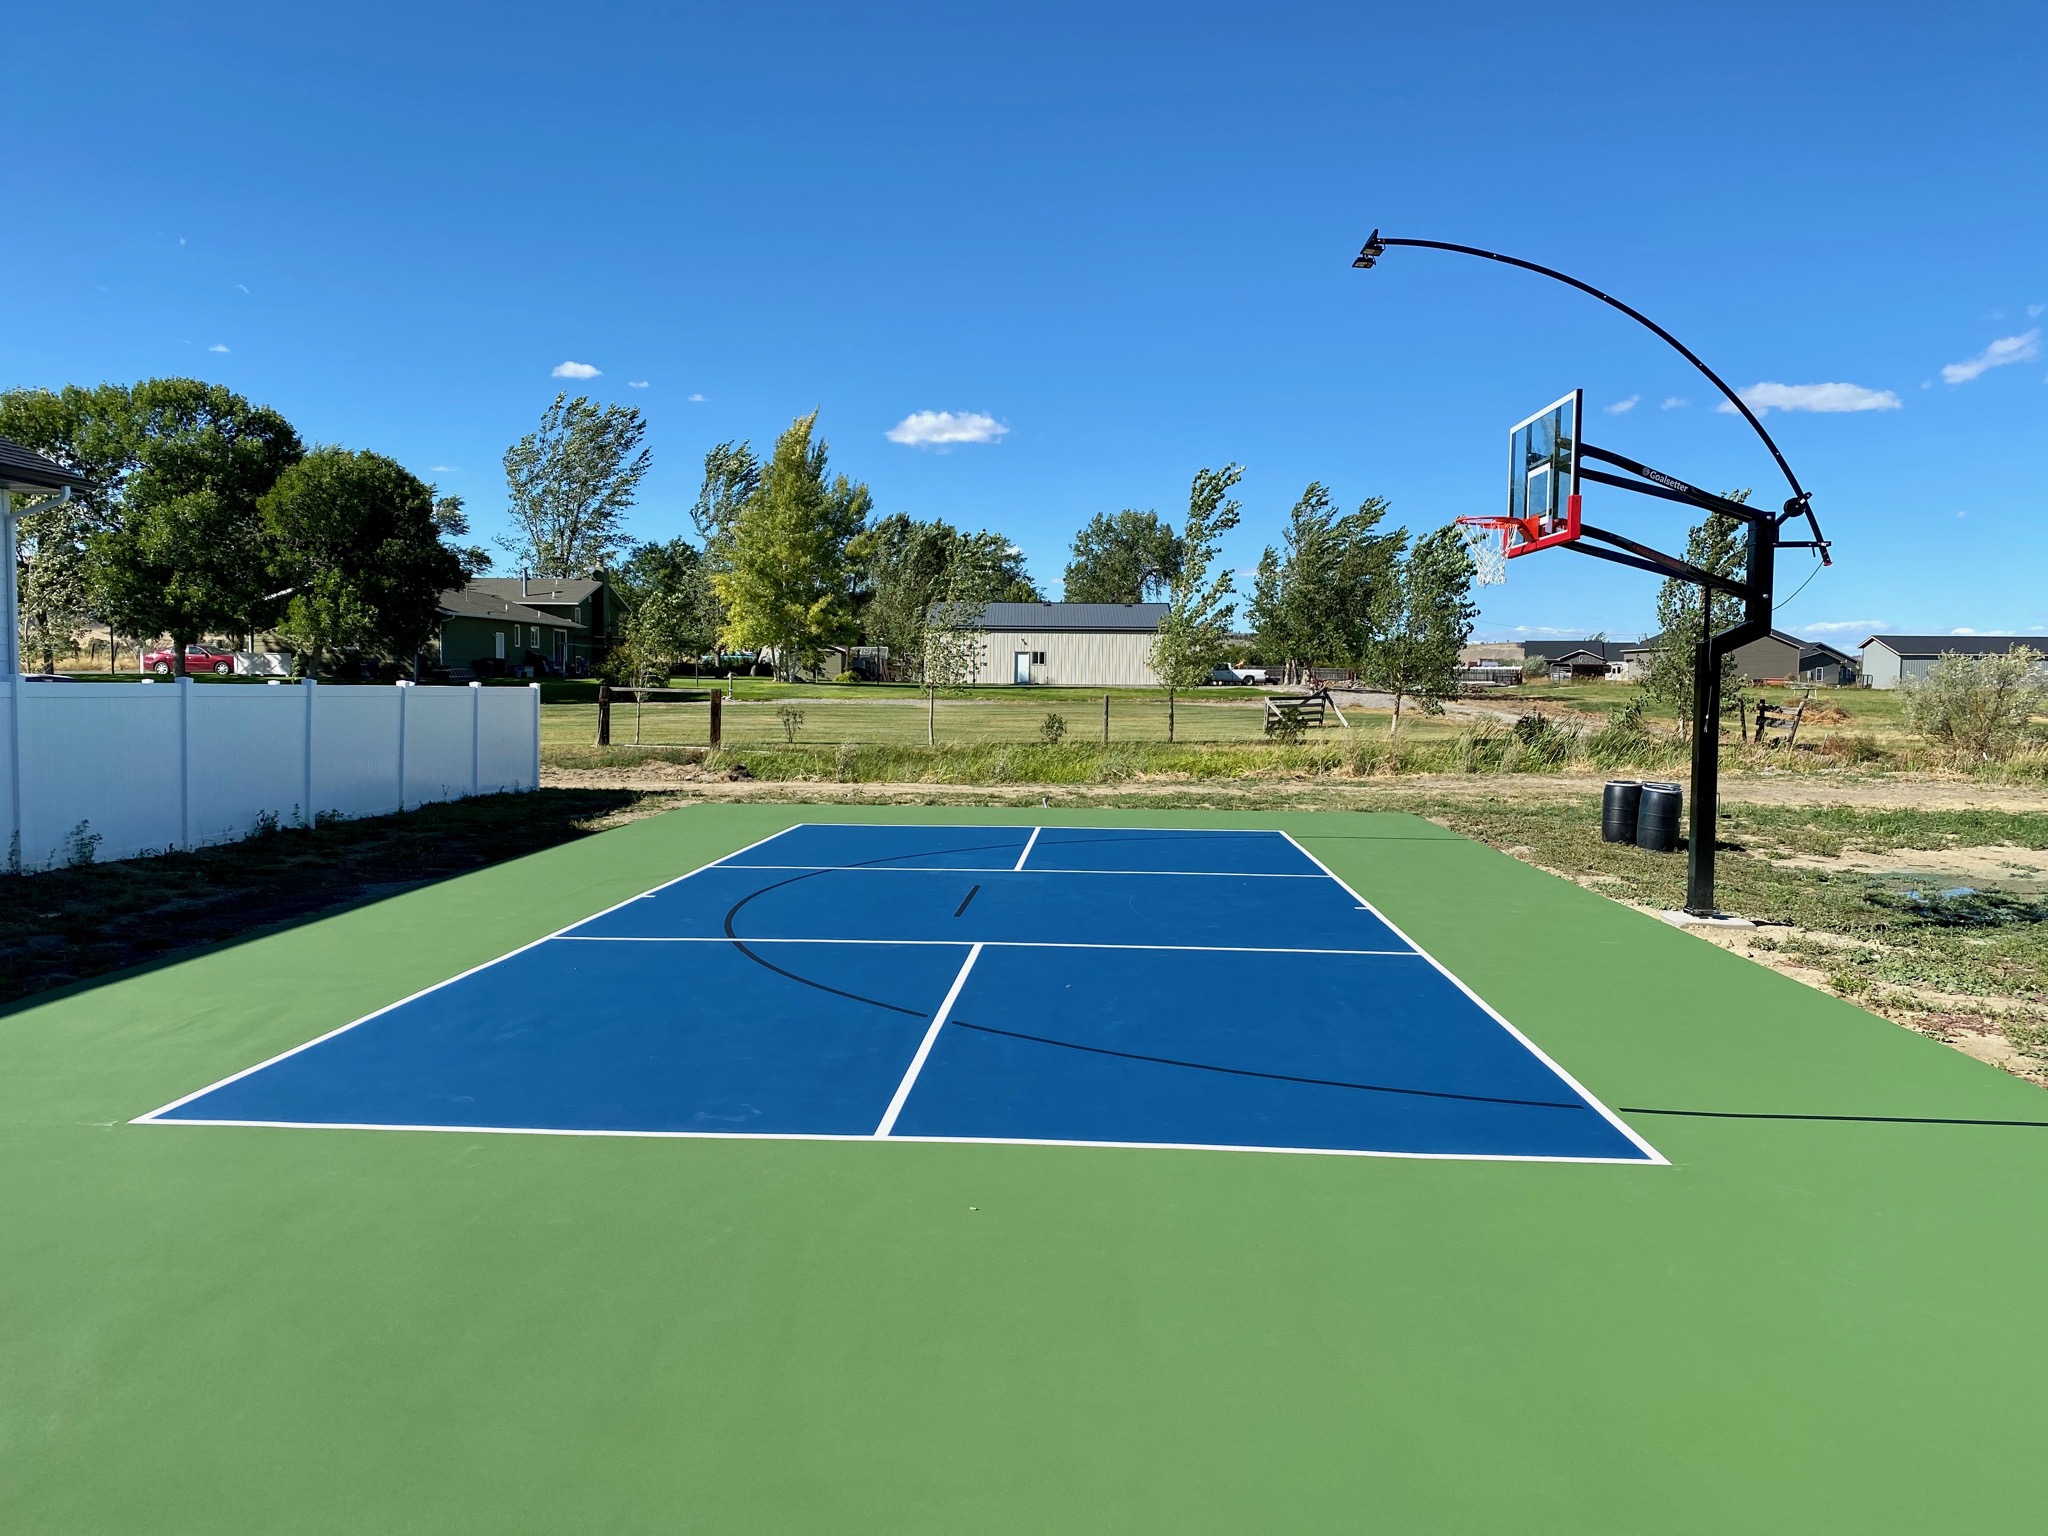 A new basketball and pickleball court withe a lighted hoop and green, white, and blue colors.